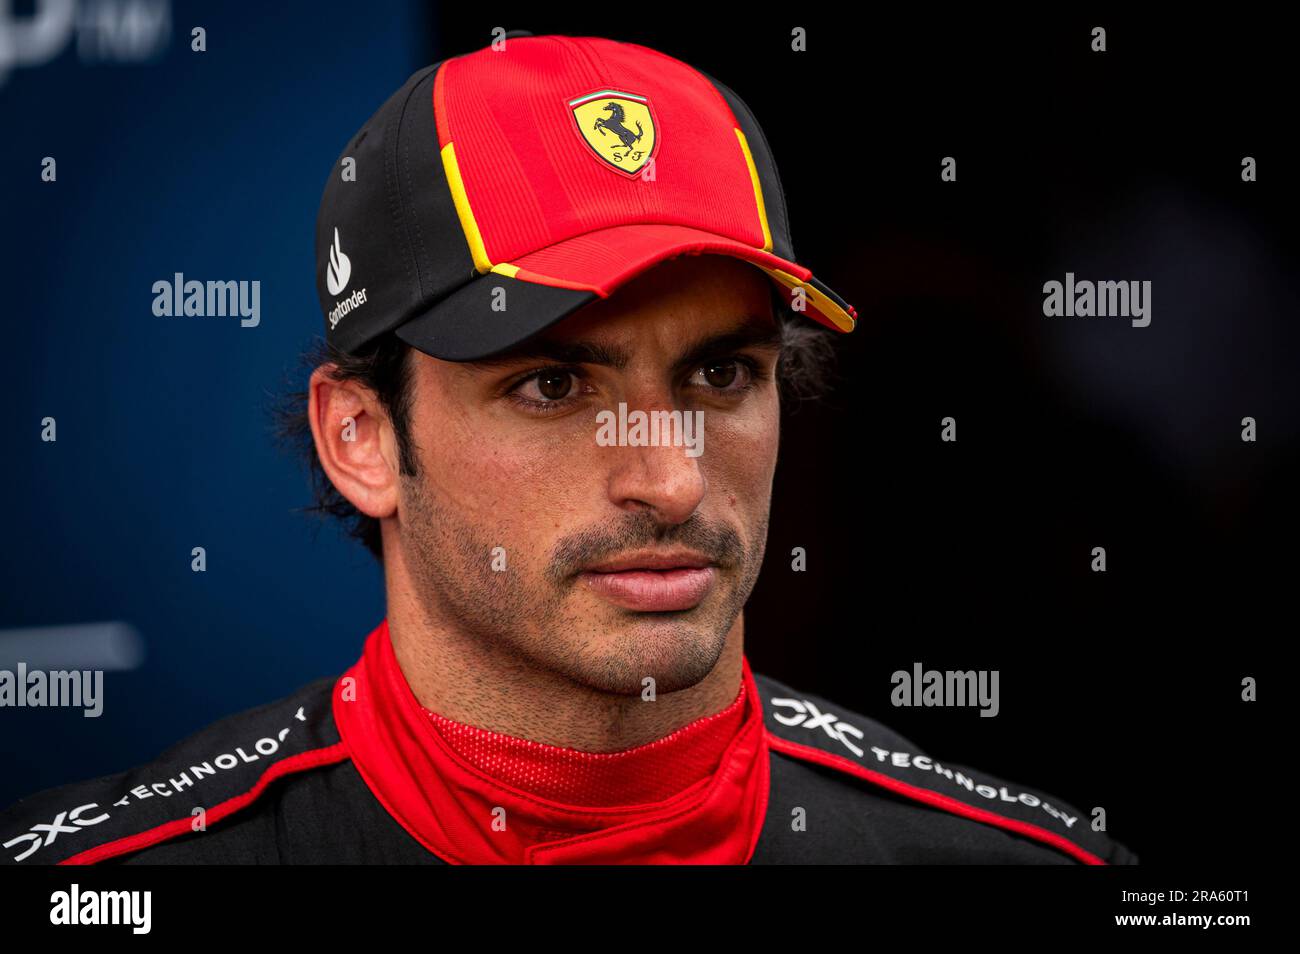 Spielberg, Austria. 30th June, 2023. Scuderia Ferrari's Spanish driver Carlos Sainz seen after the qualifying session during the Austrian F1 Grand Prix at the Red Bull Ring. Due to the new sprint format Grand Prix weekend, drivers had only one free practice and qualifying session already on Friday afternoon. Red Bull Racing's Dutch driver Max Verstappen took the pole position for Sunday's Grand Prix race, followed by Ferrari's Monegasque driver Charles Leclerc and Spanish driver Carlos Sainz. Credit: SOPA Images Limited/Alamy Live News Stock Photo